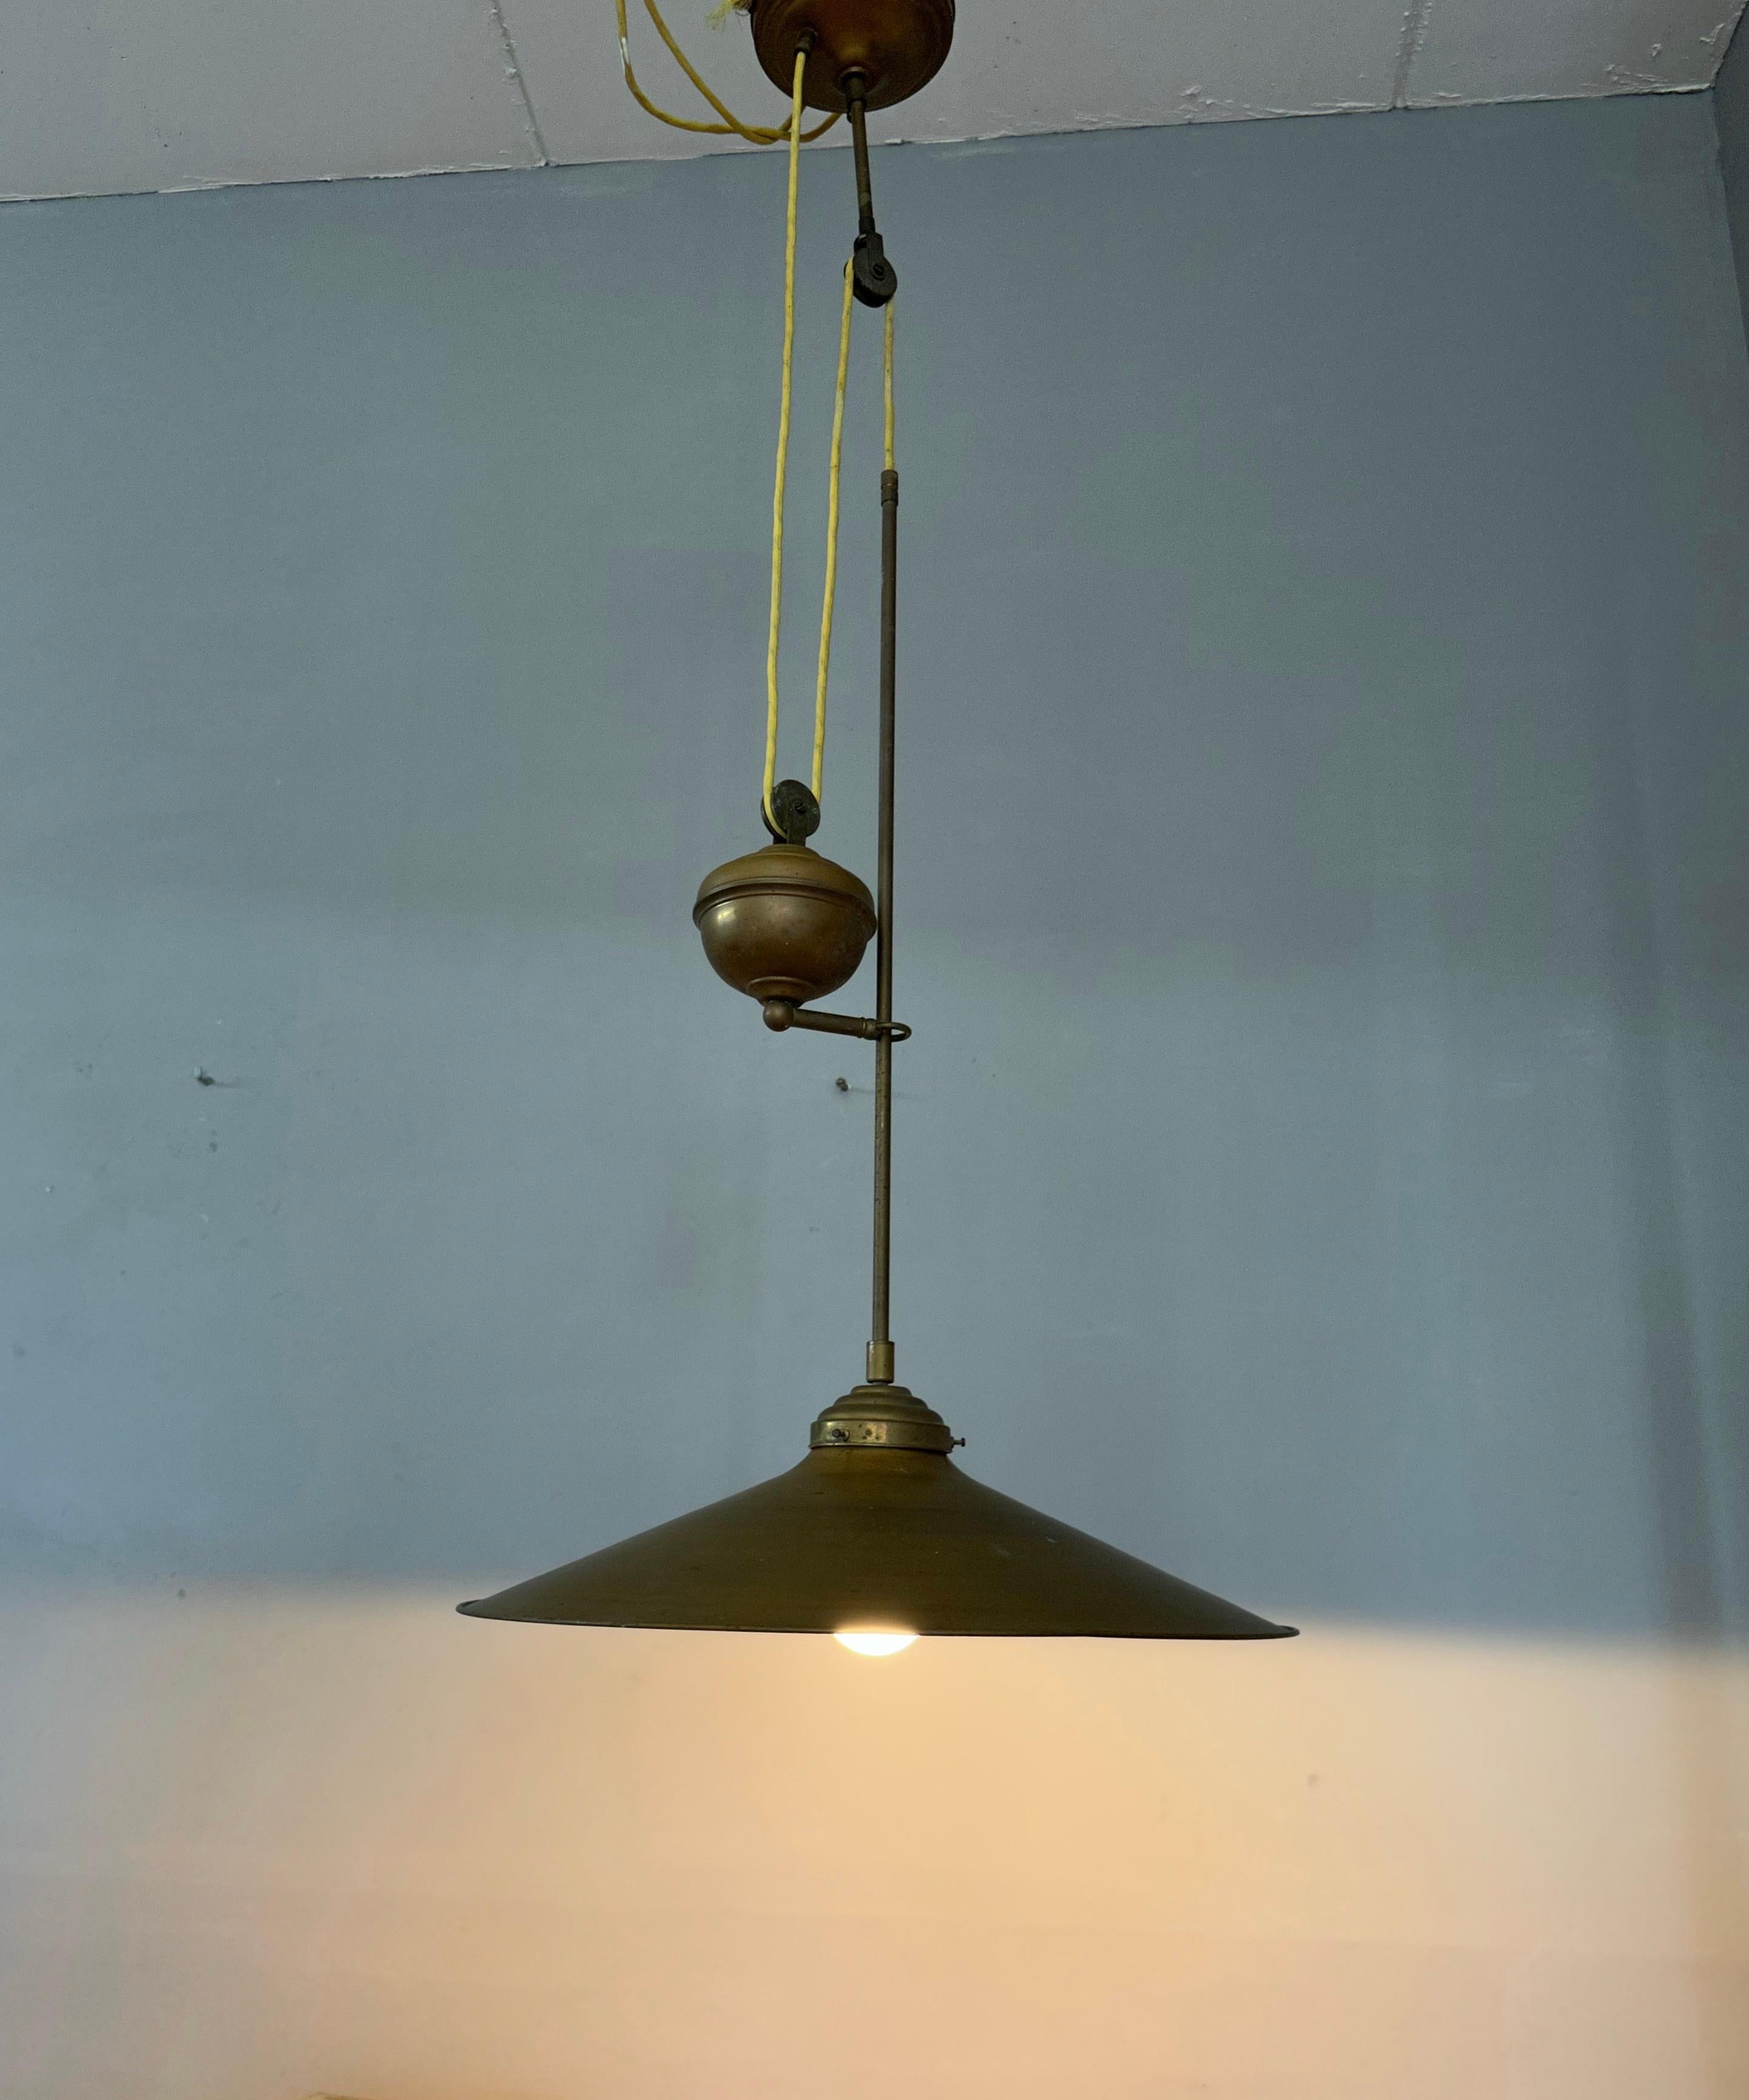 Stylish, midcentury made and height adjustable light fixture with a great patina.

This rare 1970s light fixture is ideal for bringing good style and the perfect kind of light to your midcentury kitchen, dining area, living room, landing etc. This